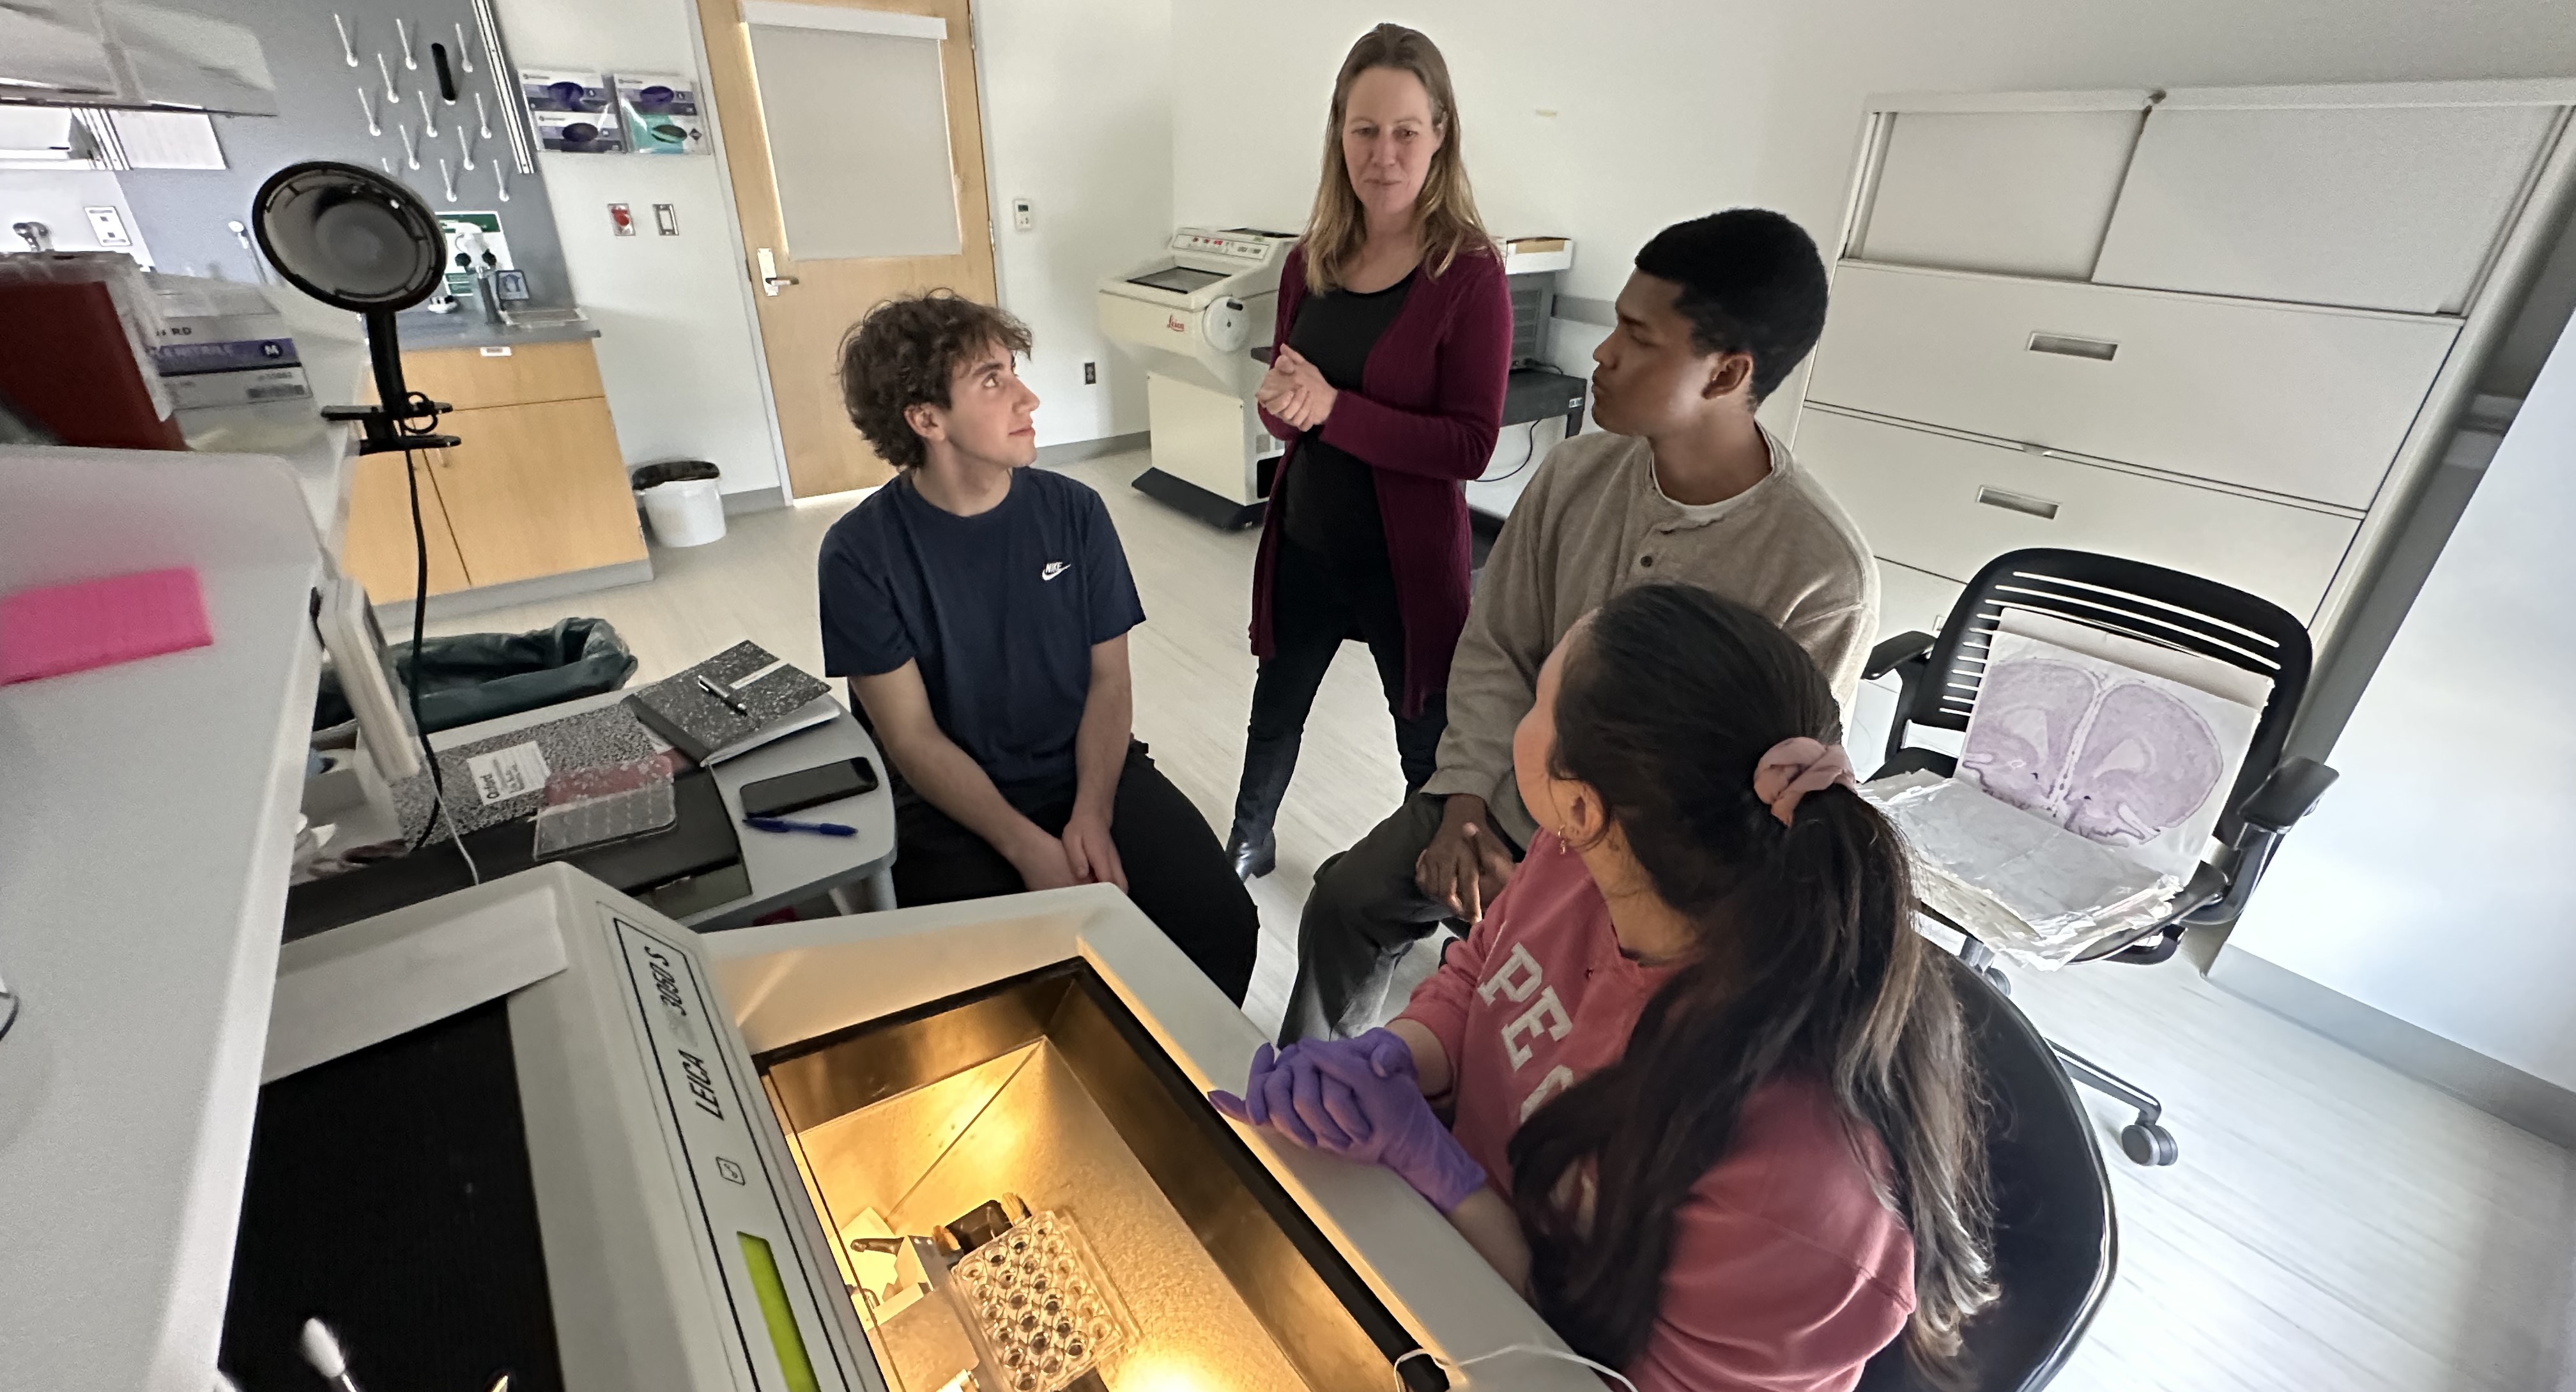 Dr. Veenam and three students talk in their lab.